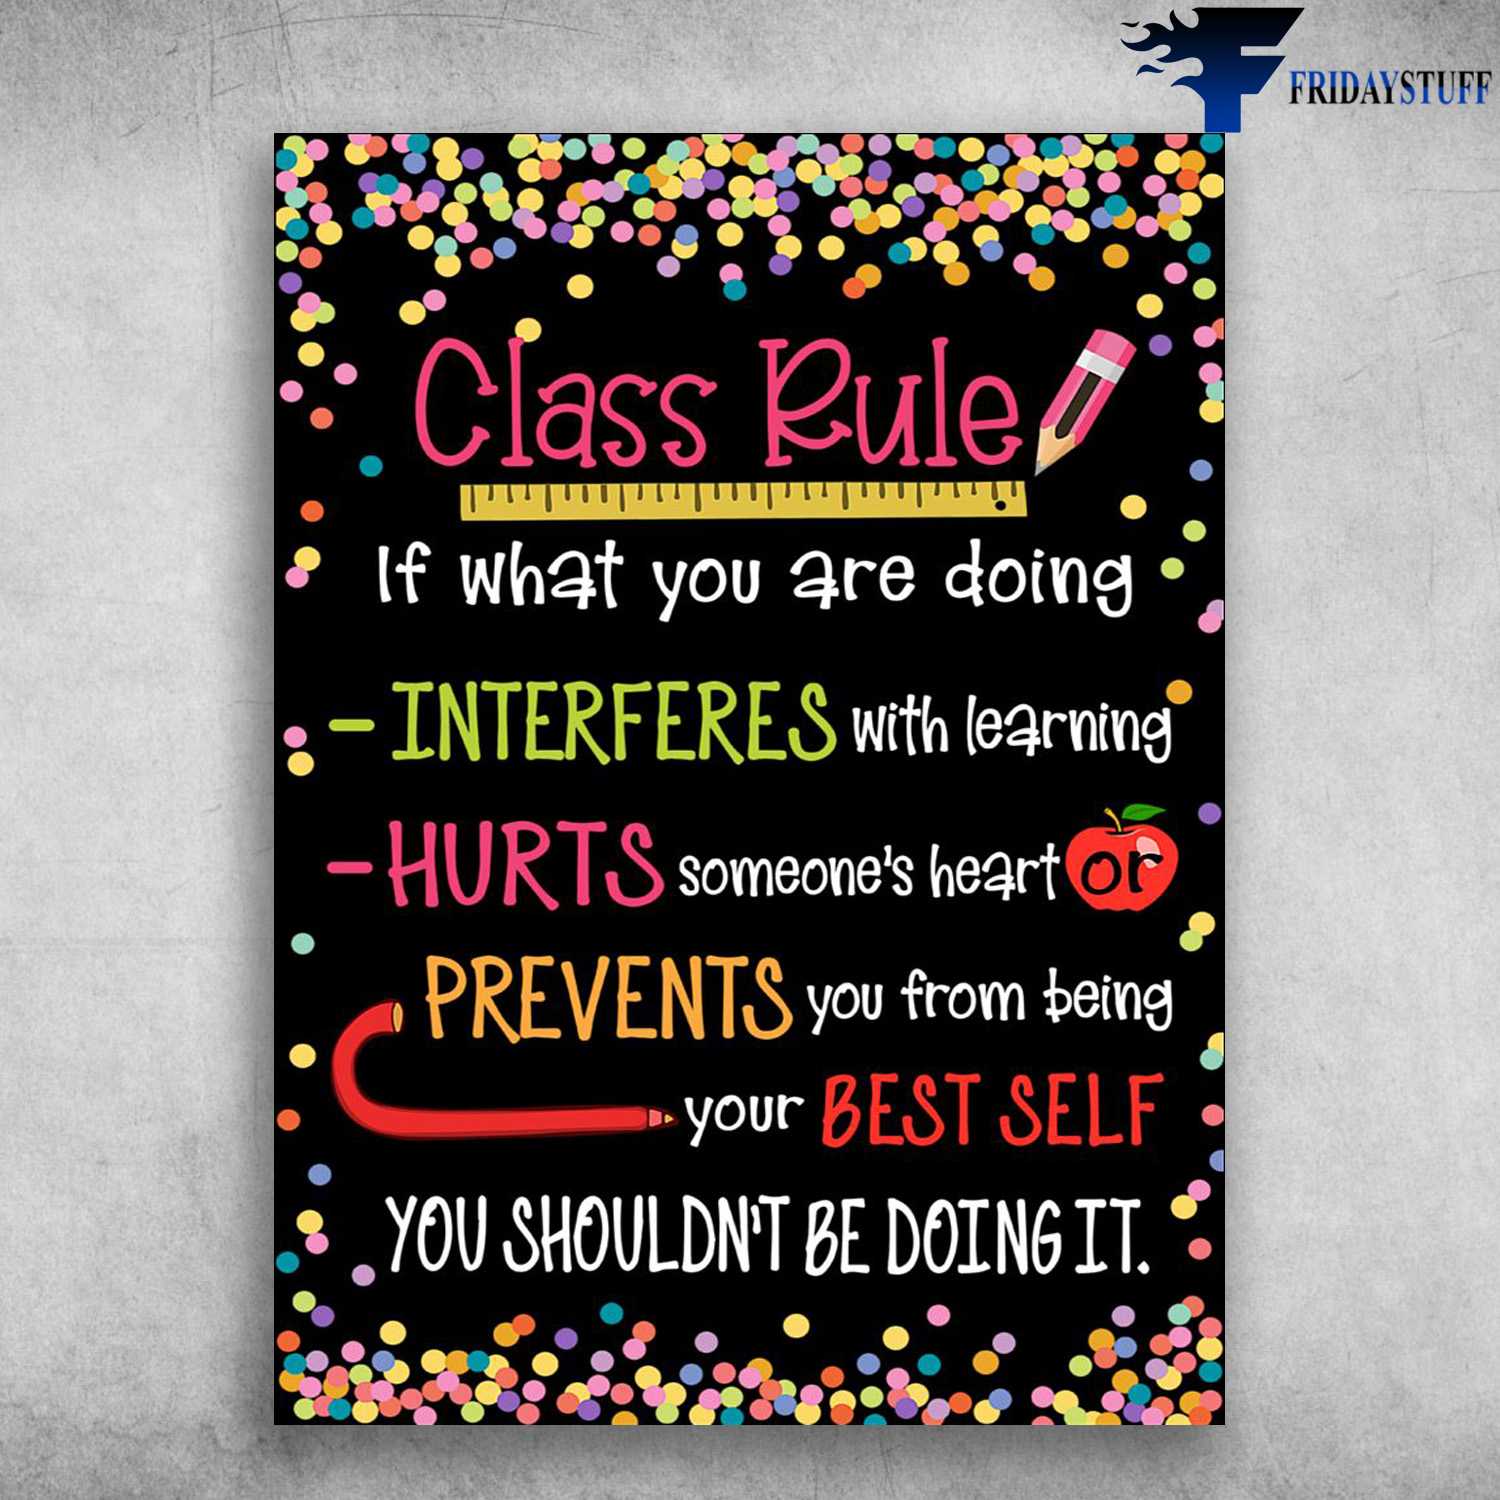 Classroom Rules, Class Rule - If What You Are Doing, Interferes With Learning, Hurts Someone's Heart Or, Prevents You From Being You Best Self, You Shouln't Be Doing It